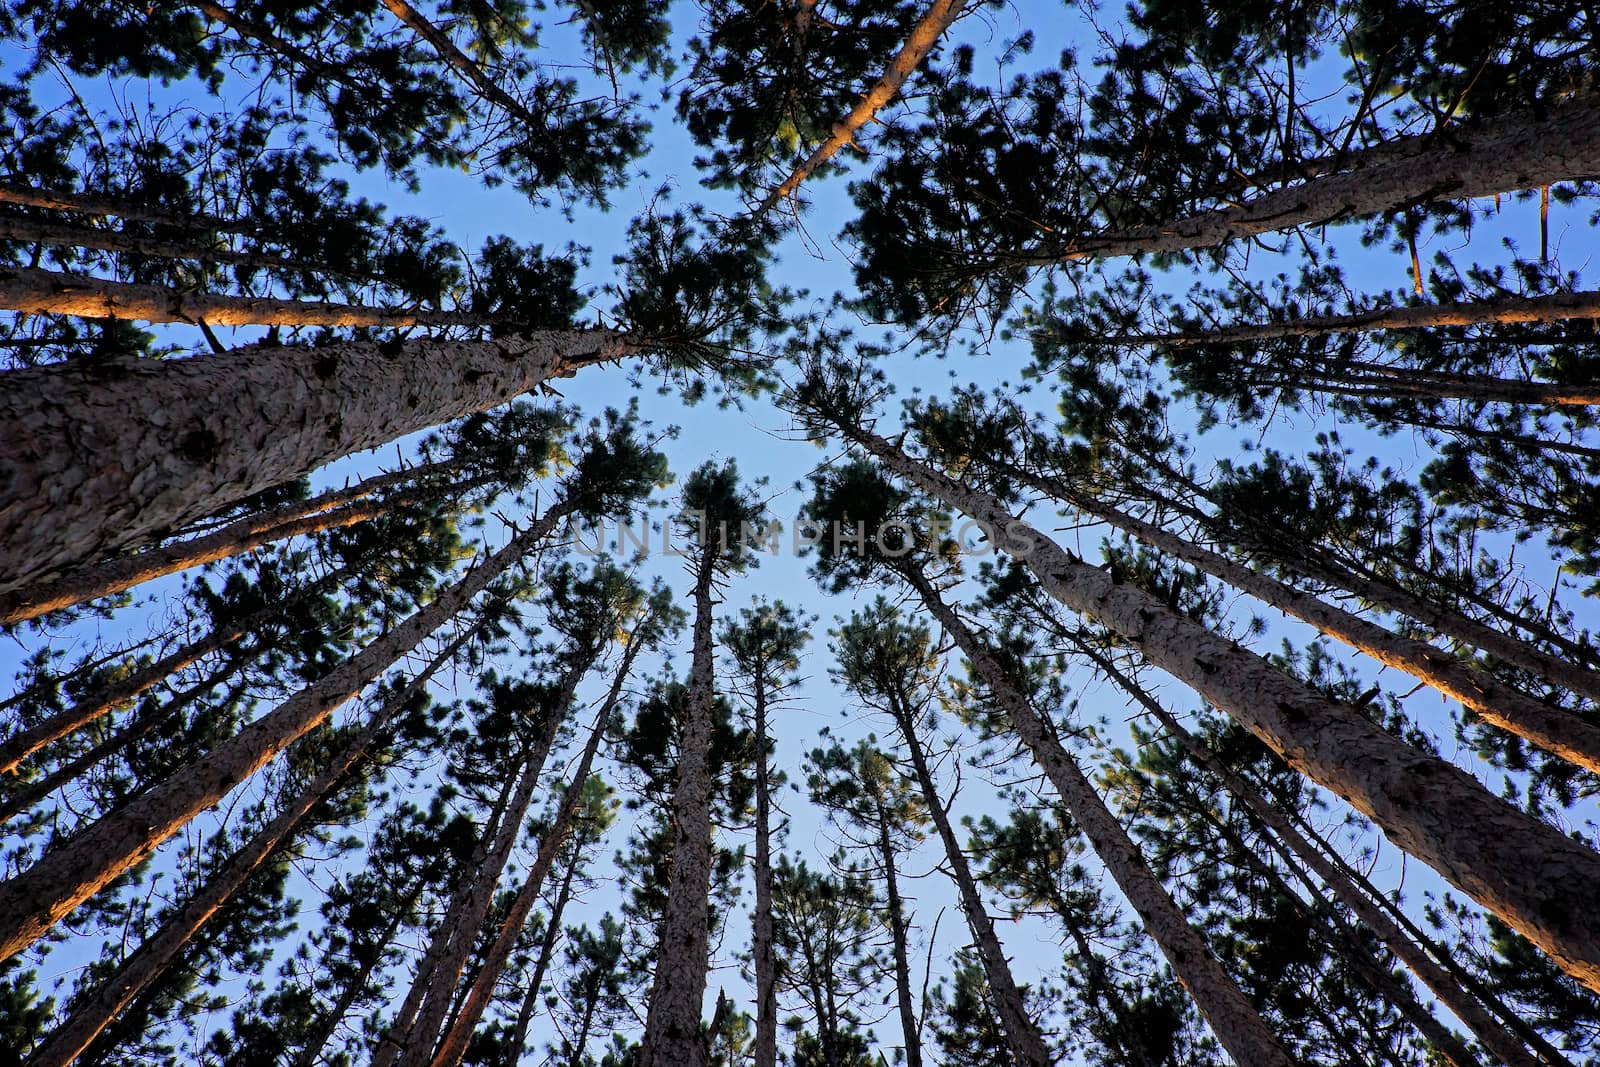 Image taken in a grove of pine trees looking up towards sky